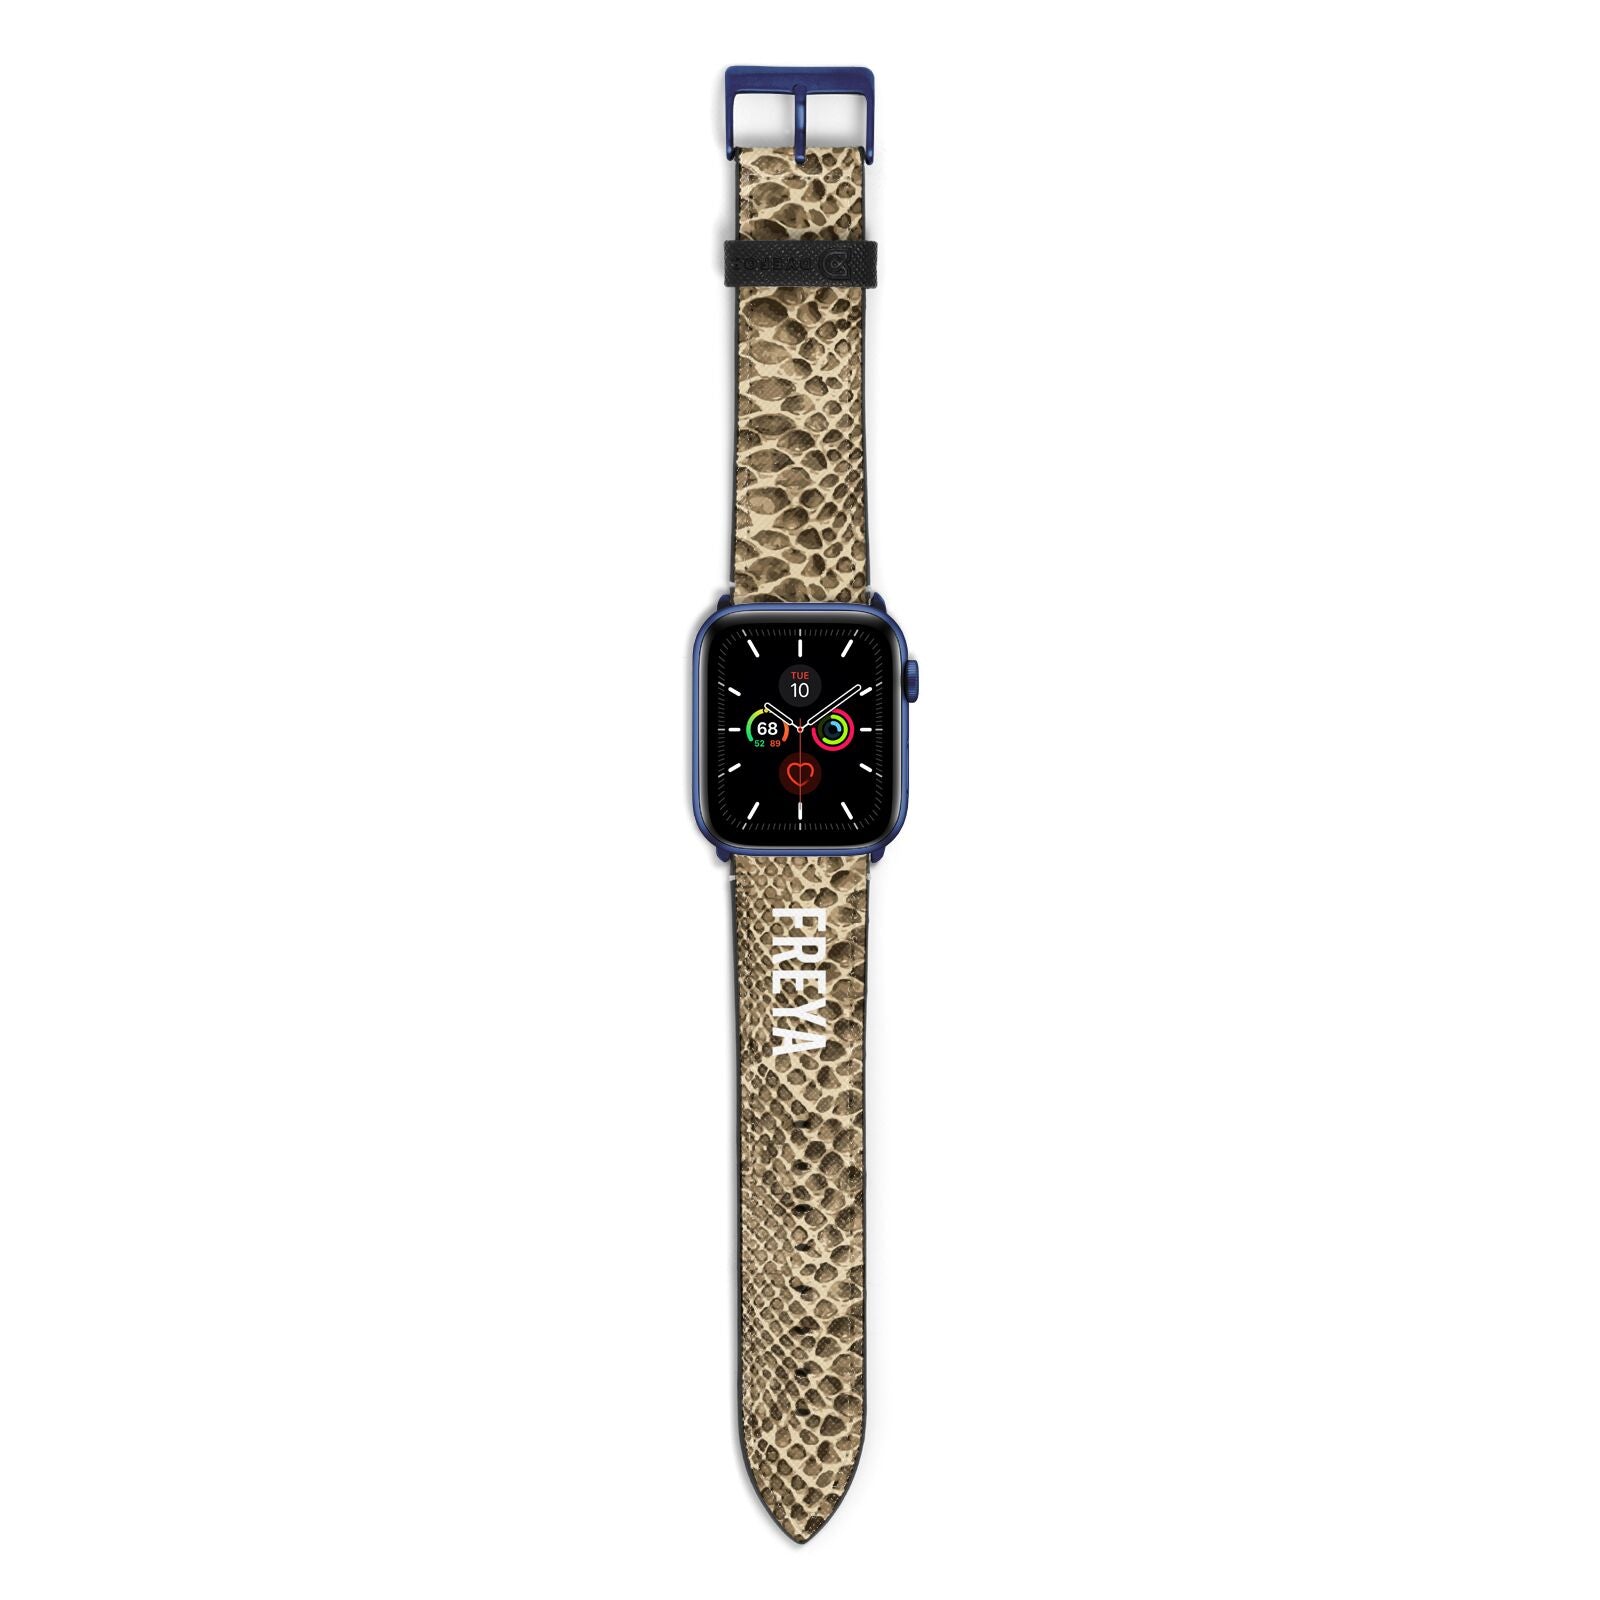 Personalised Tan Snakeskin Apple Watch Strap with Blue Hardware